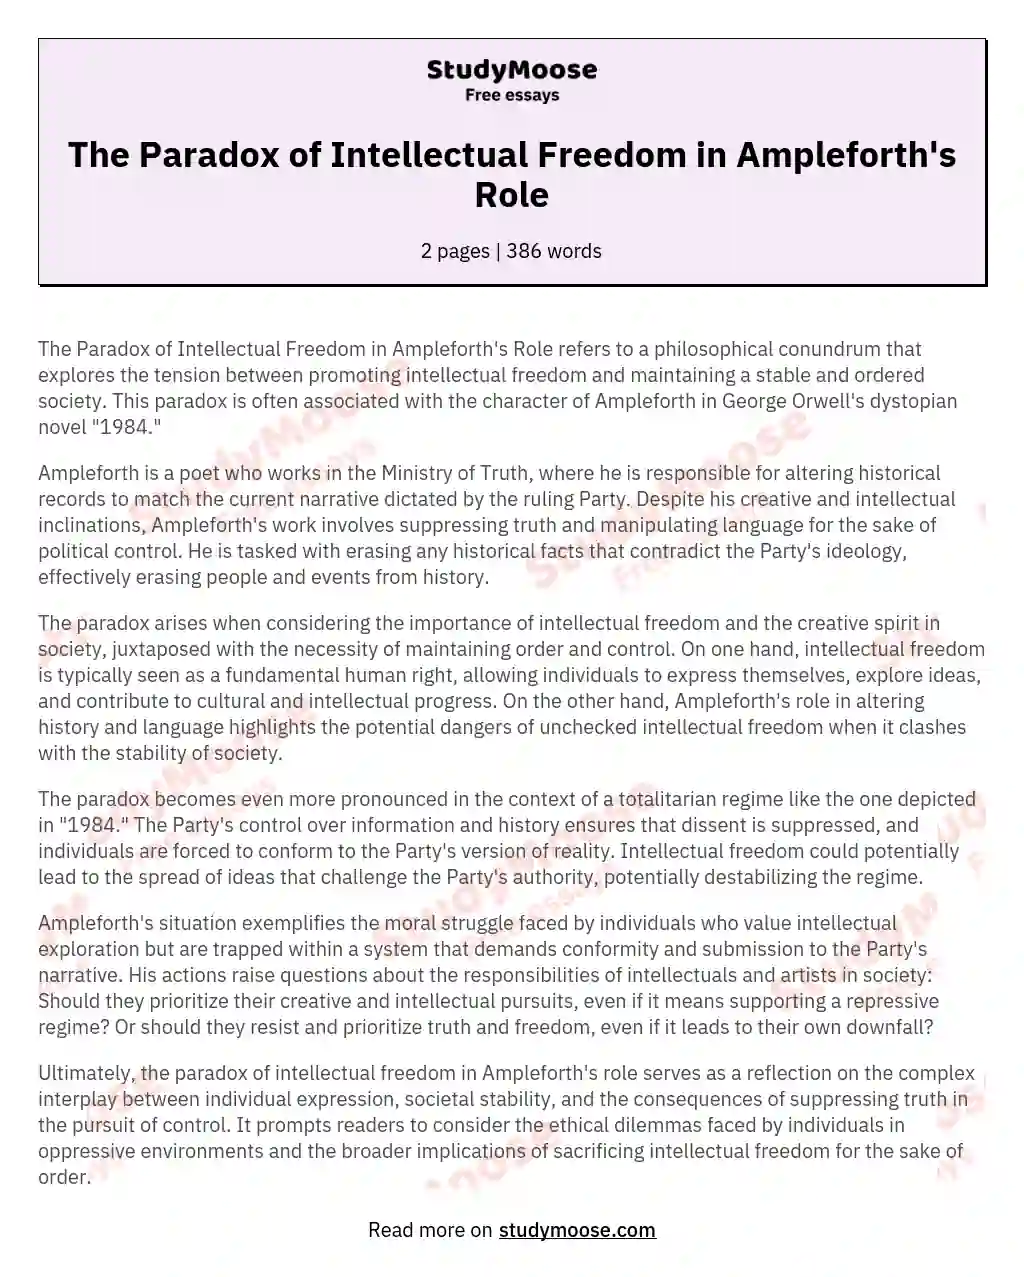 The Paradox of Intellectual Freedom in Ampleforth's Role essay